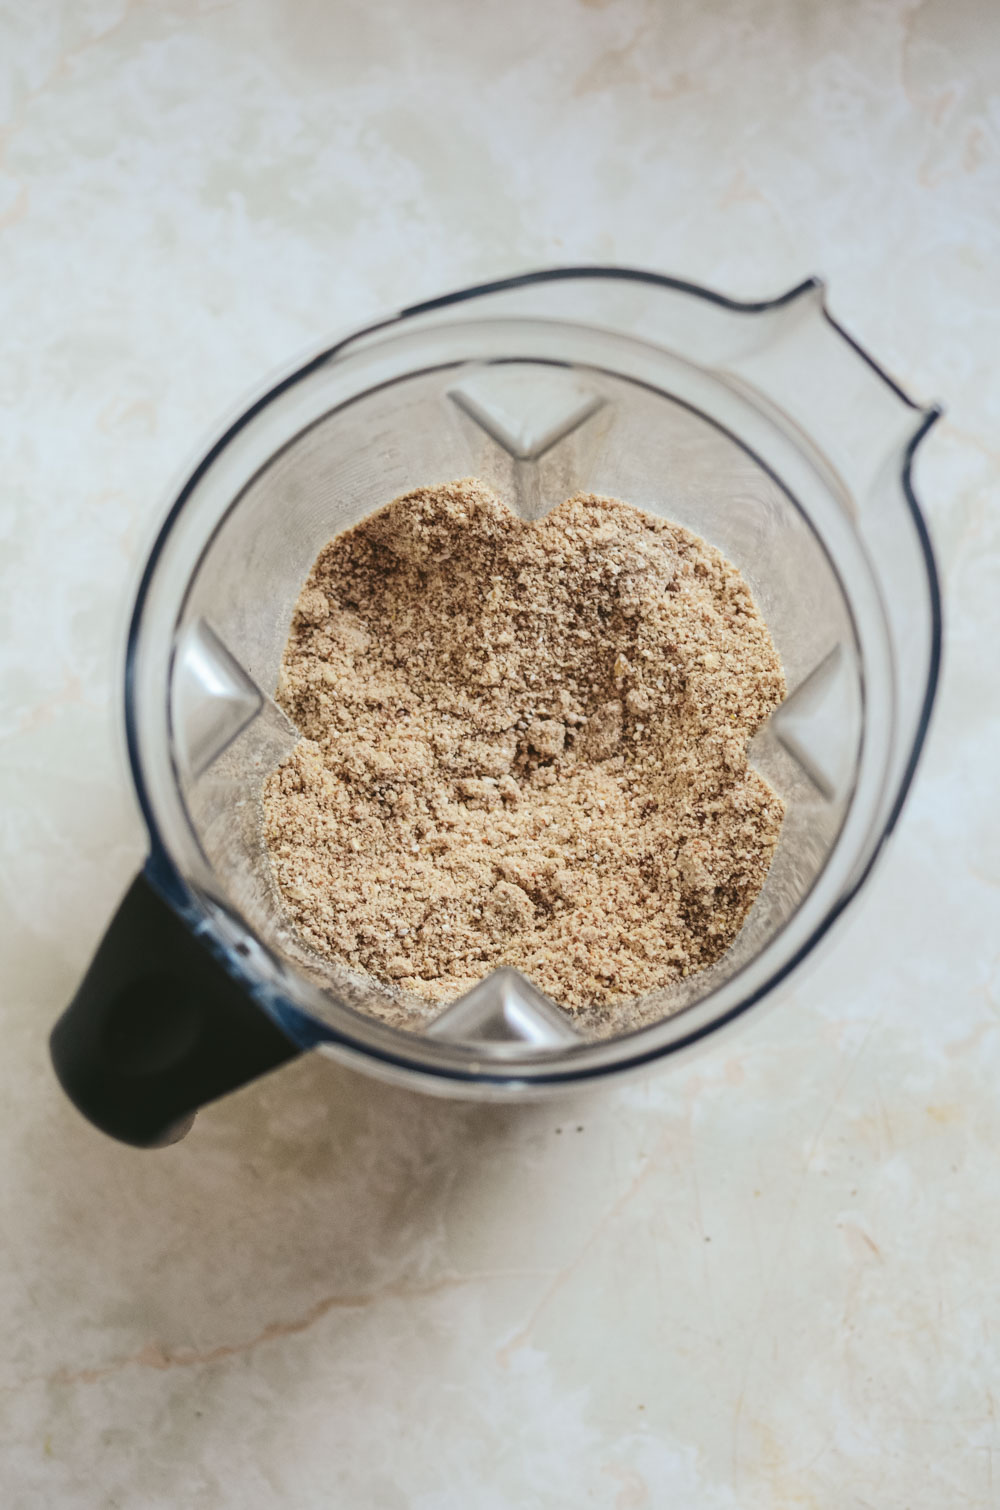 Blended almonds and oats in vitamix.